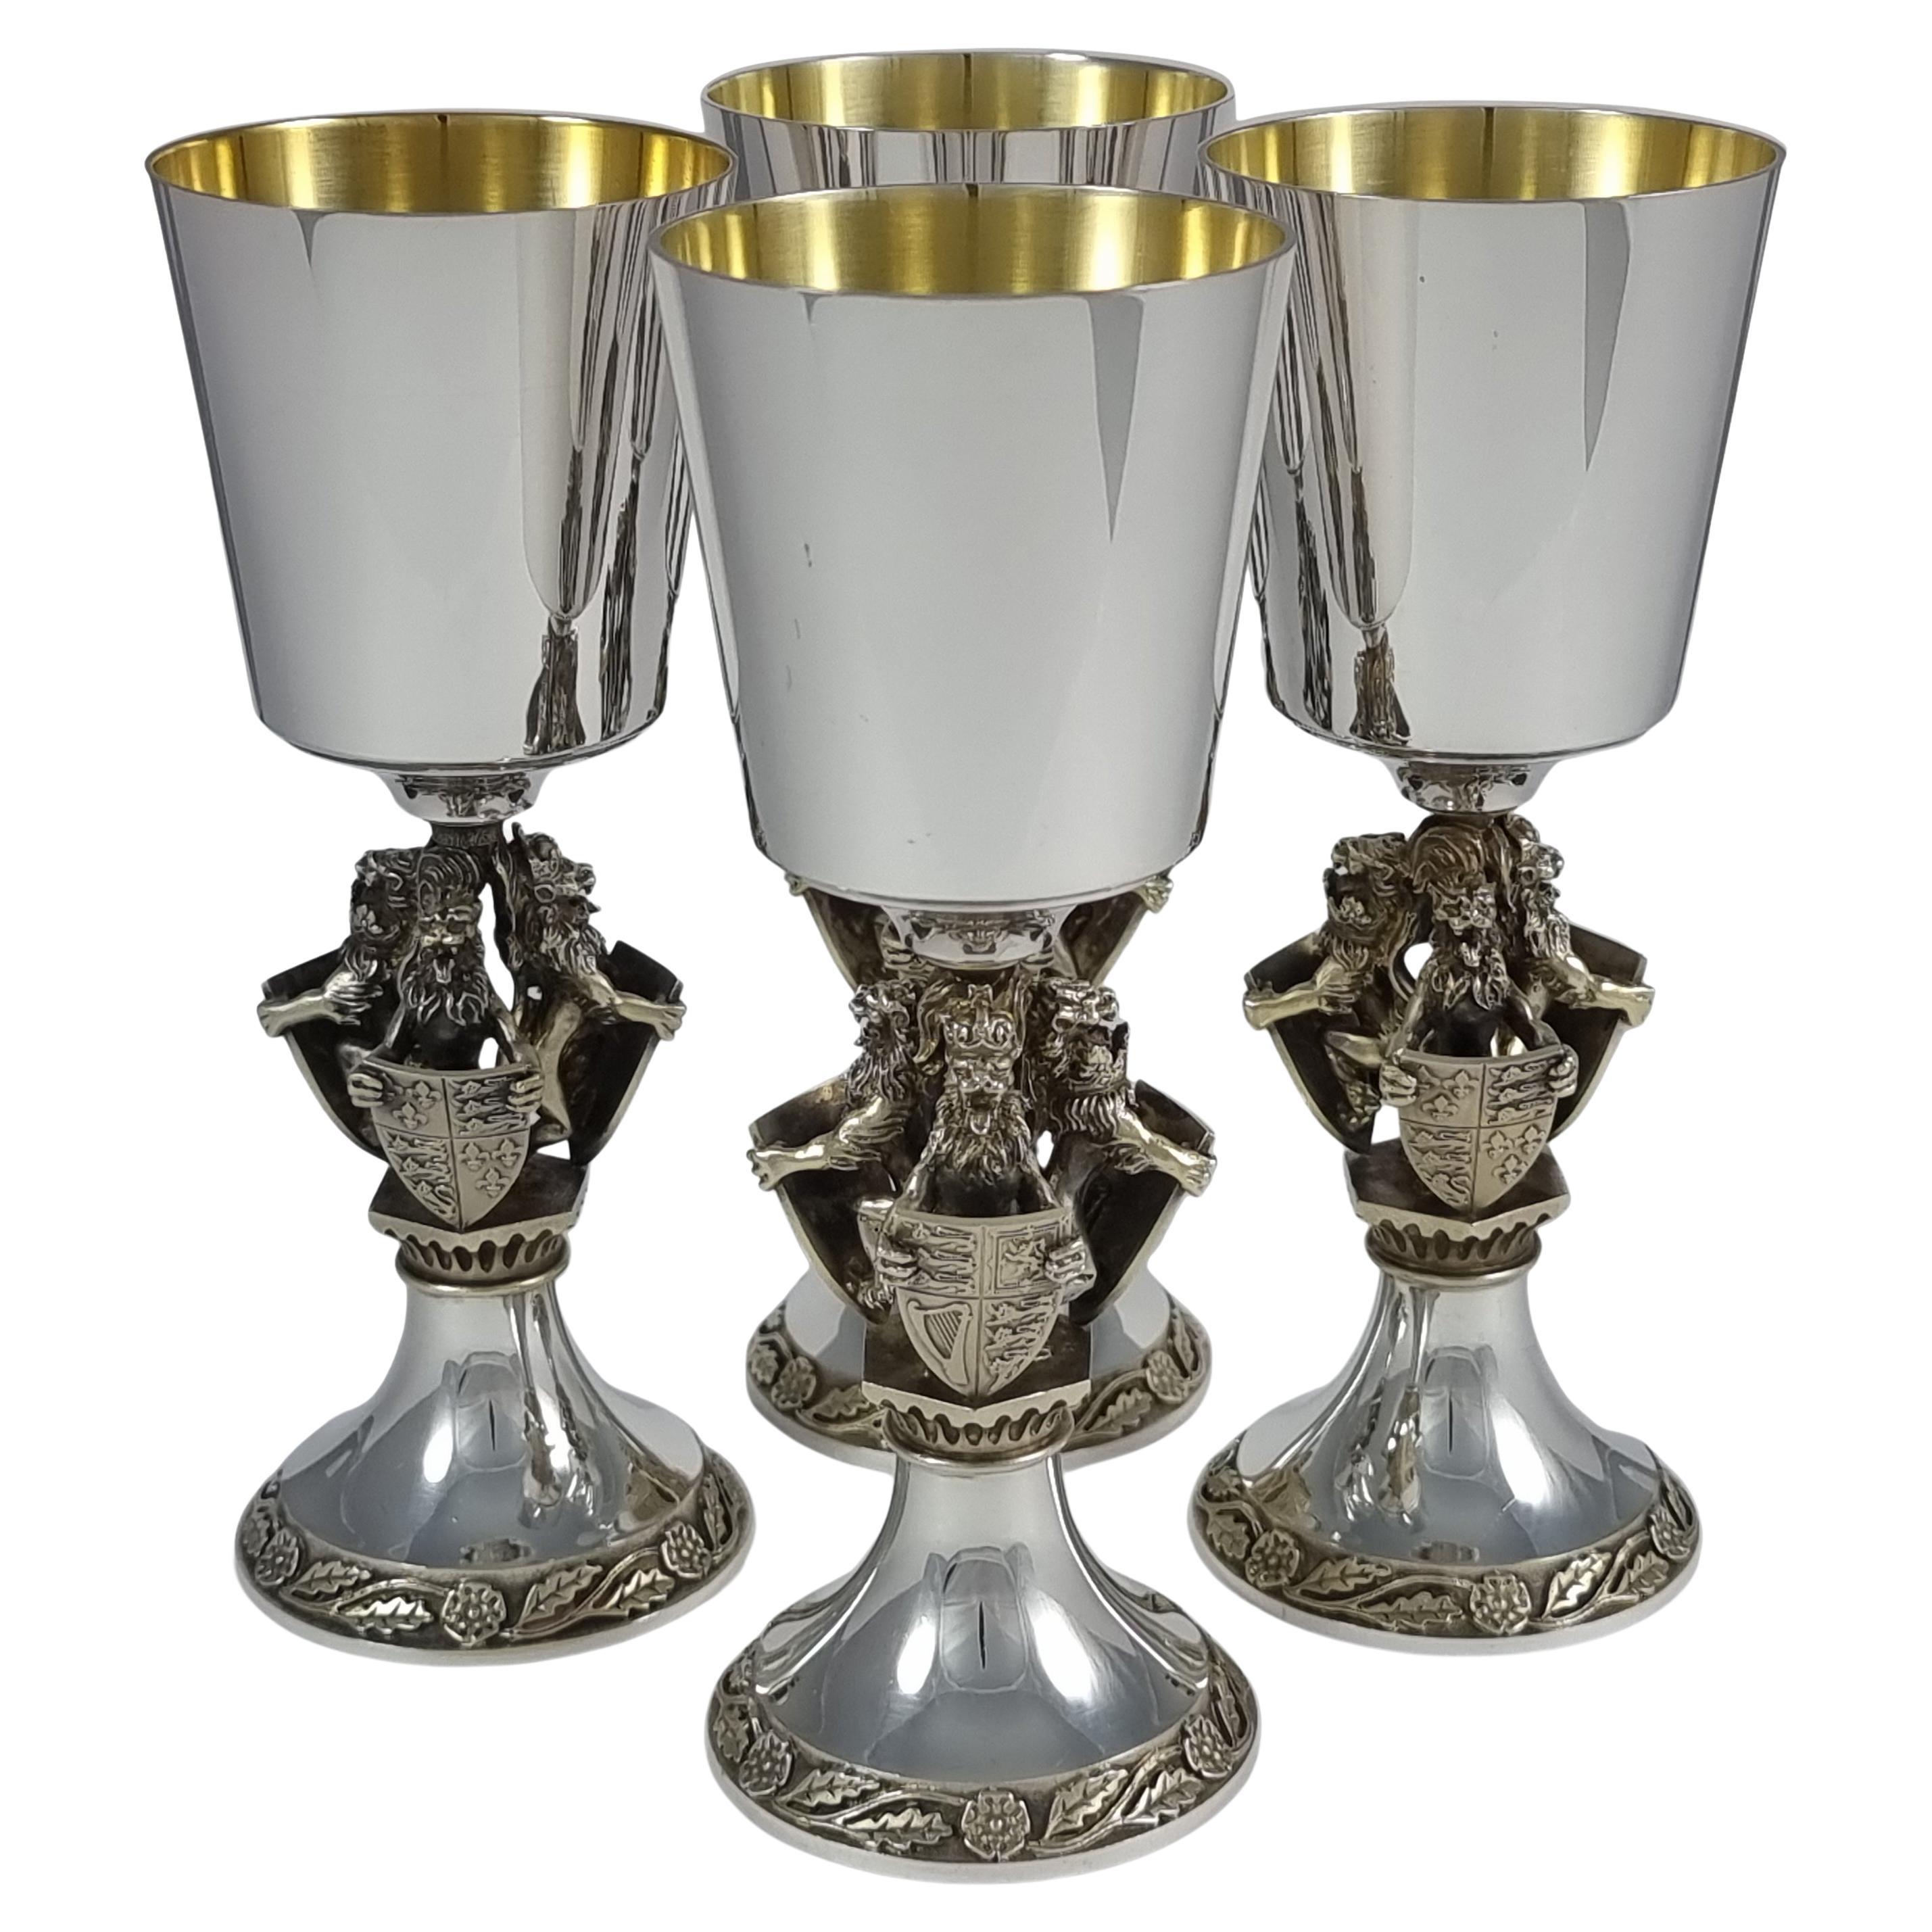 Set of Four Aurum Silver Gilt 'College of Arms' Goblets, Hector Miller, 1984 For Sale